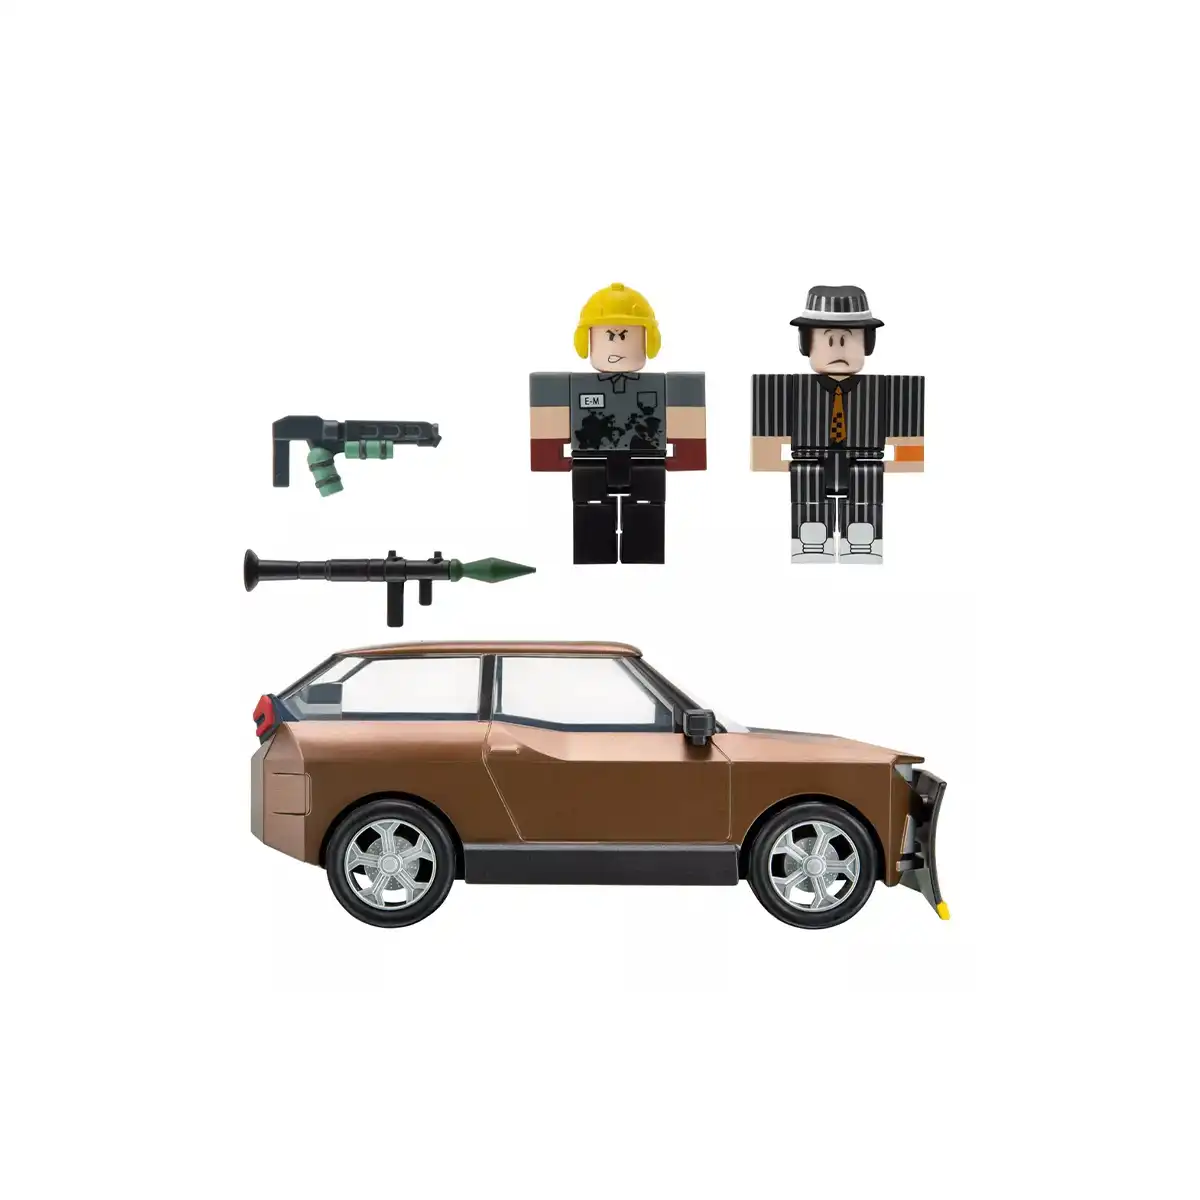 Roblox Action Collection - Car Crusher 2: Grandeur Dignity Feature